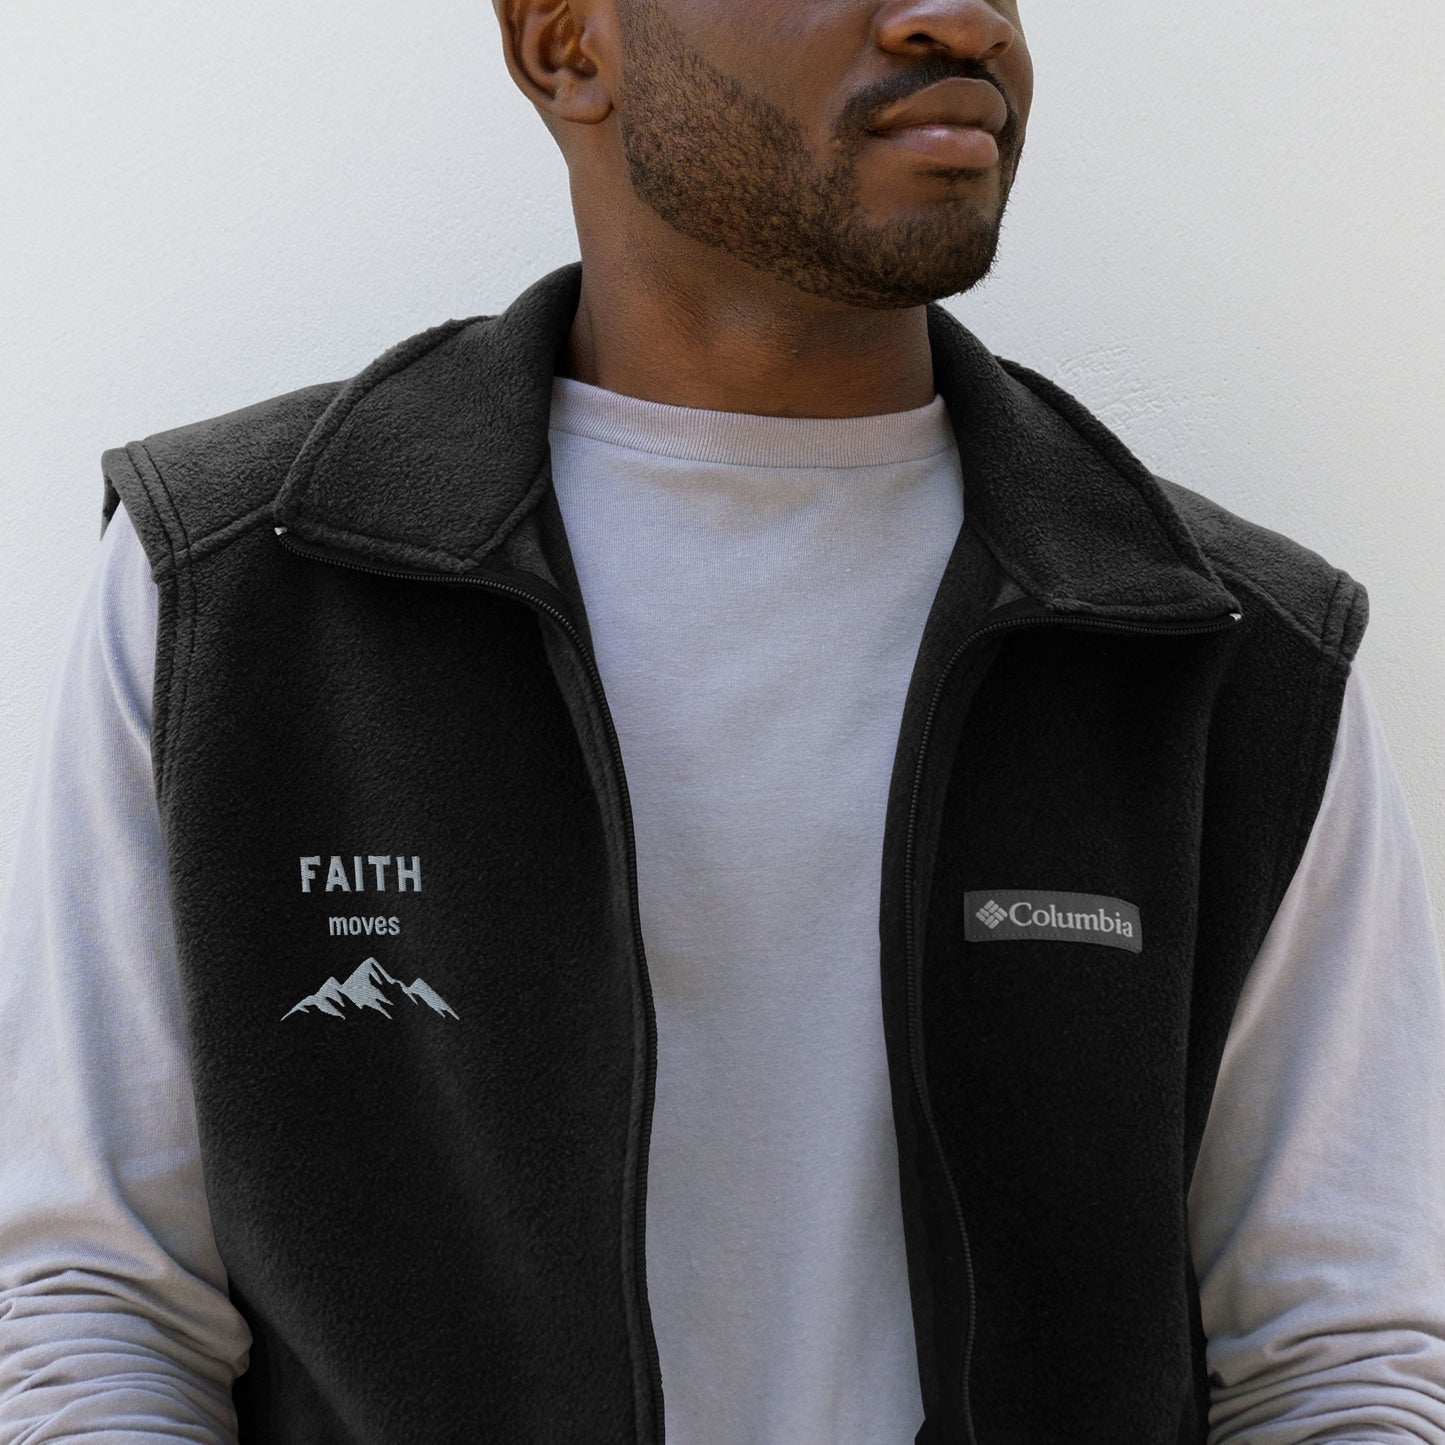 Torso and partial face view of man with facial stubble wearing light gray long sleever shirt and a black Columbia fleece vest embroidered on the right chest side with the words FAITH moves and a graphic of mountains.